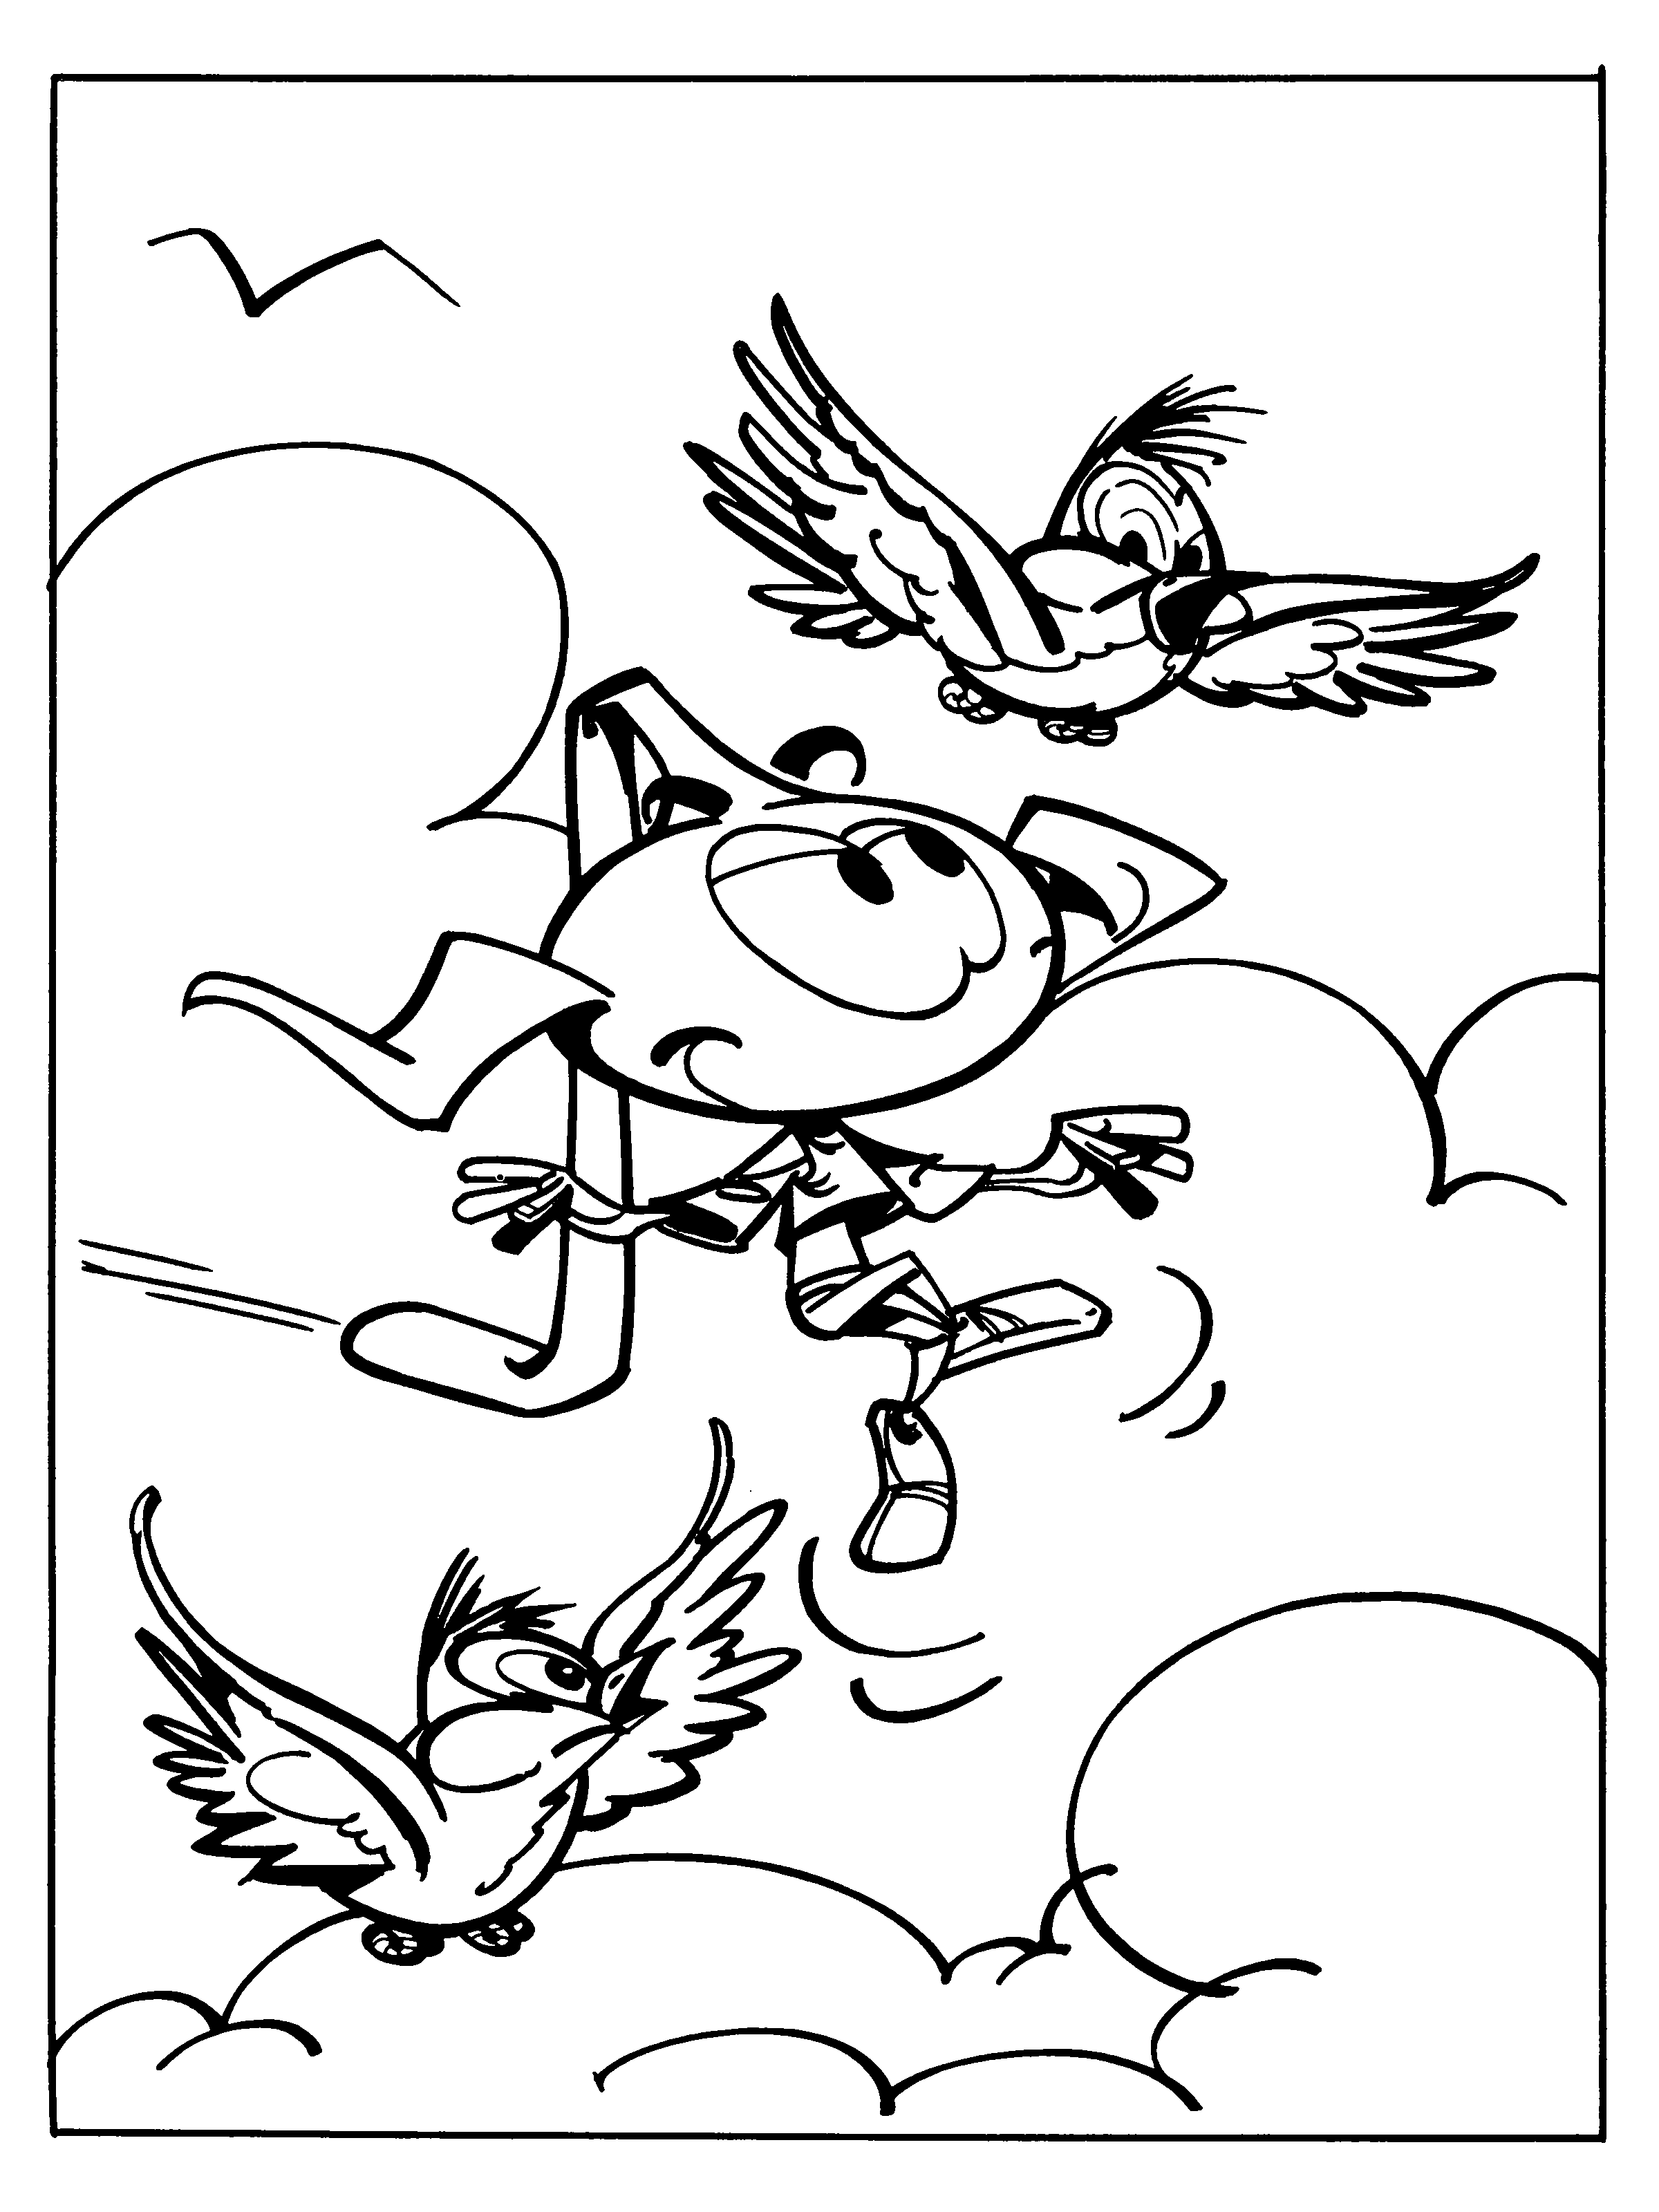 Snorks Coloring Pages